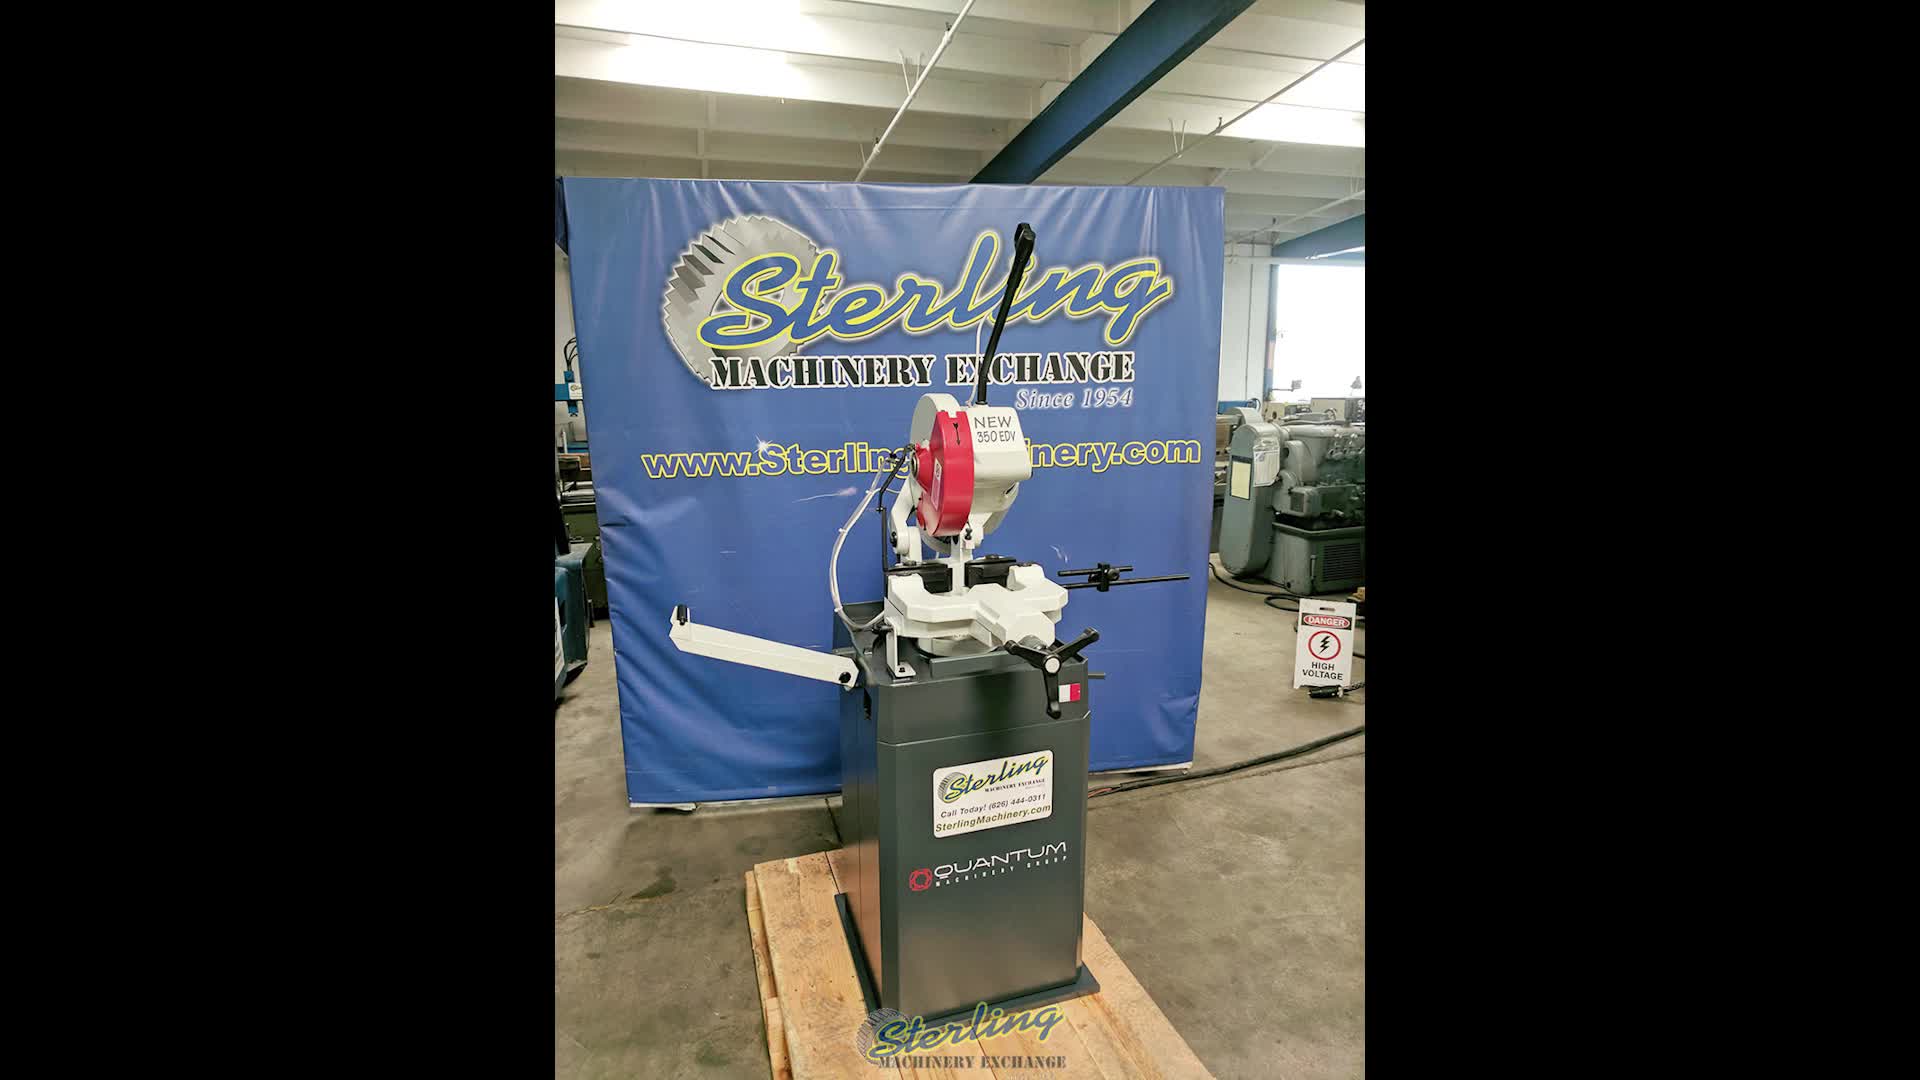 MACC-14" 14" Brand New MACC Manual Cold Saw (Ferrous Material), Mdl. MACC 350 EDV, Movable Head - 45 deg L/45 deg R, Reduction Unit in Oil Bath, Double Hinged Pin with Eccentric Brush, Double Quick Locking Vise, Coolant Filter, Power Driven Pump for Band Cool-01